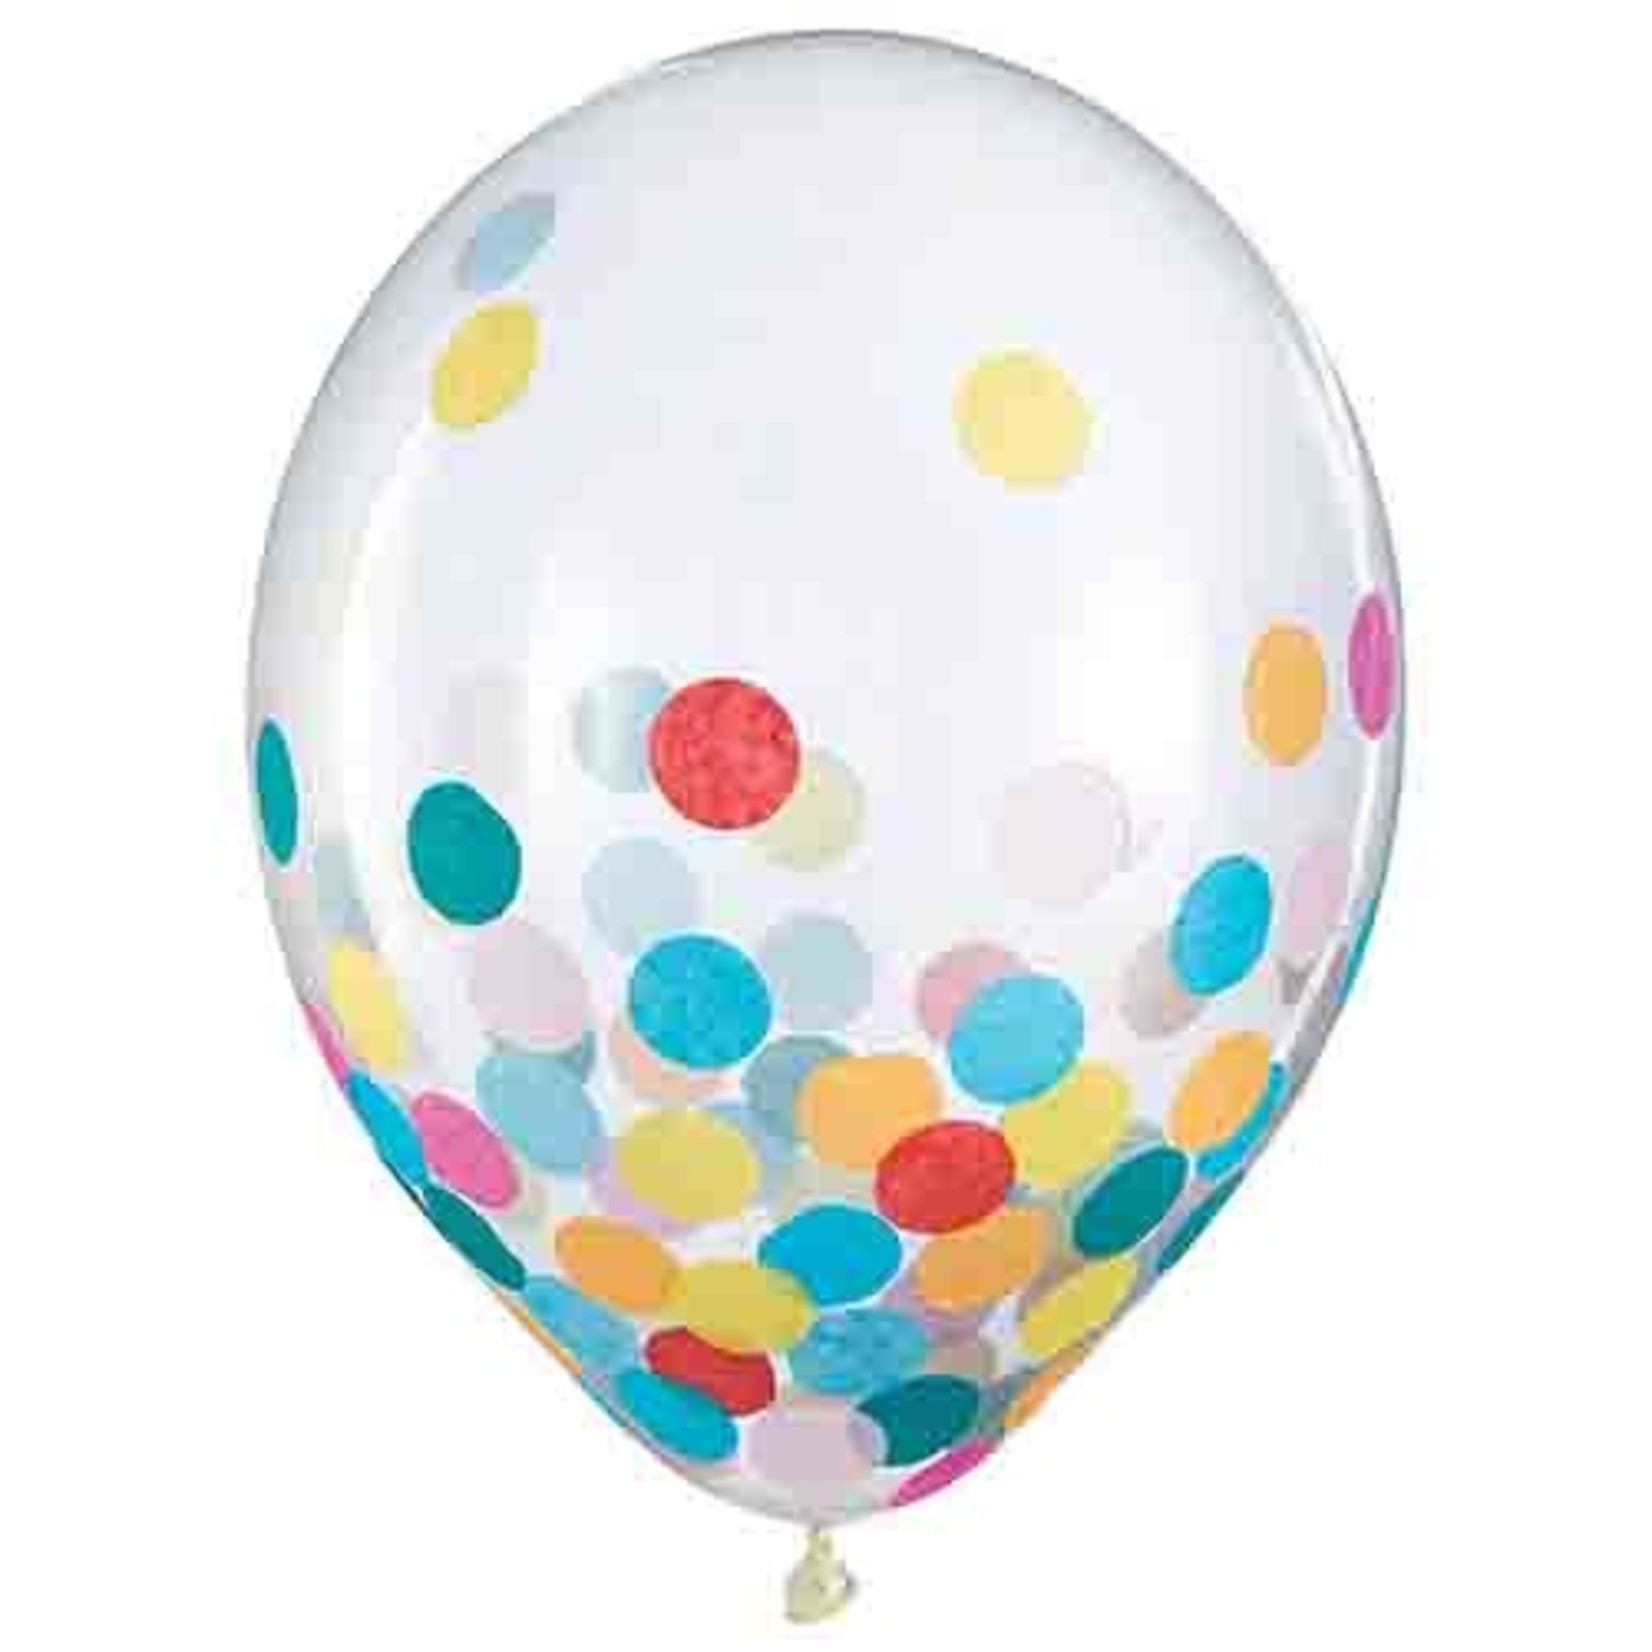 Amscan 12" Multi-Color Confetti-Filled Latex Balloons - 6ct.